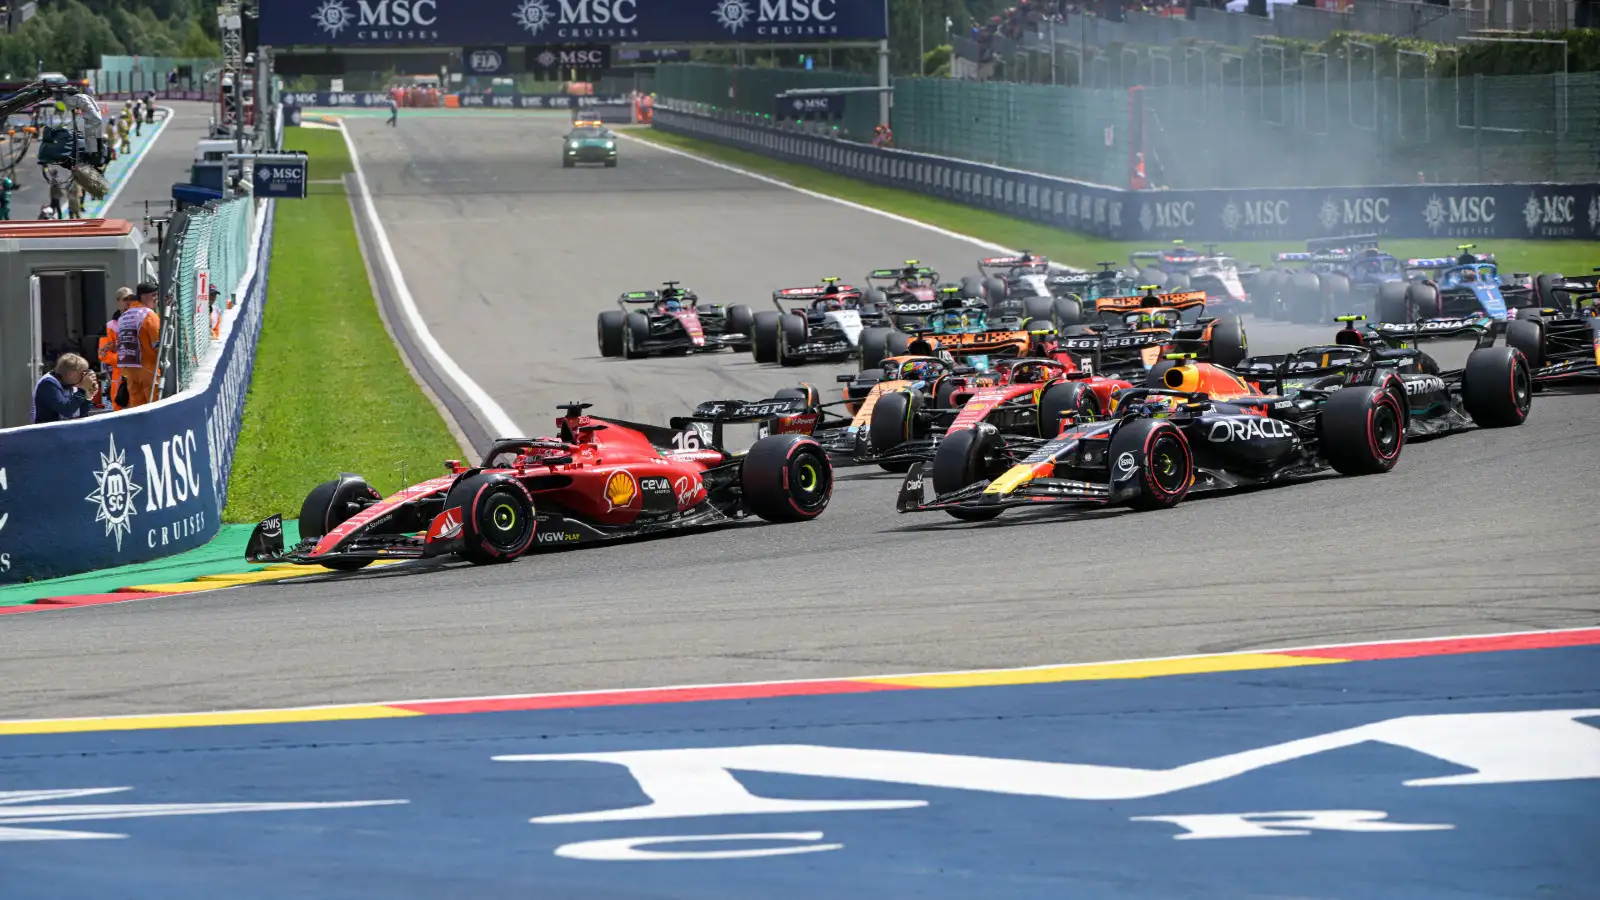 Ferrari's Charles Leclerc leads at the start of the Belgian Grand Prix. Spa-Francorchamps.